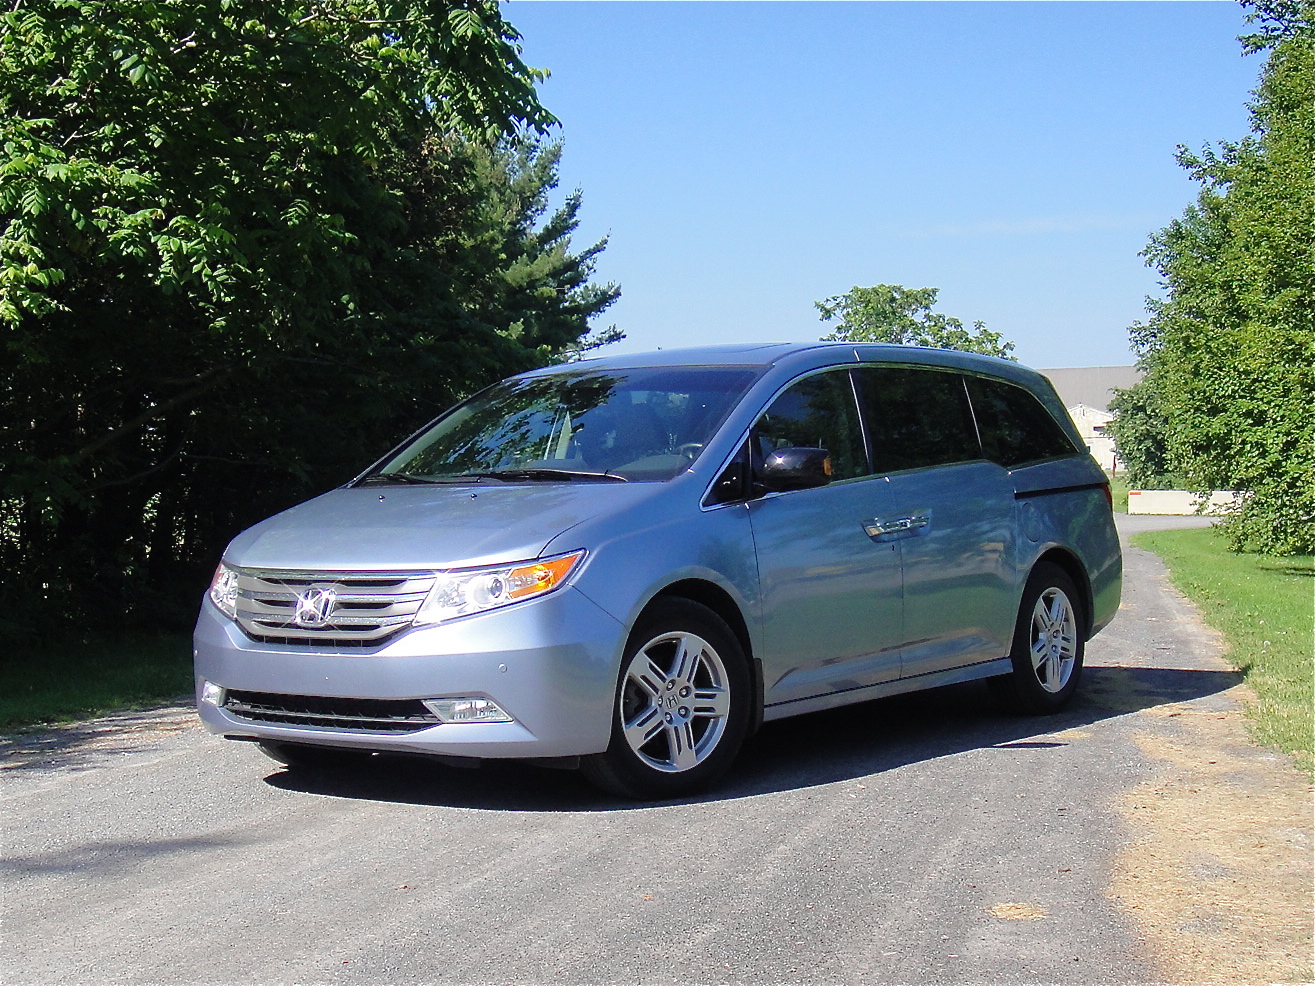 which is better honda odyssey or toyota sienna 2011 #3